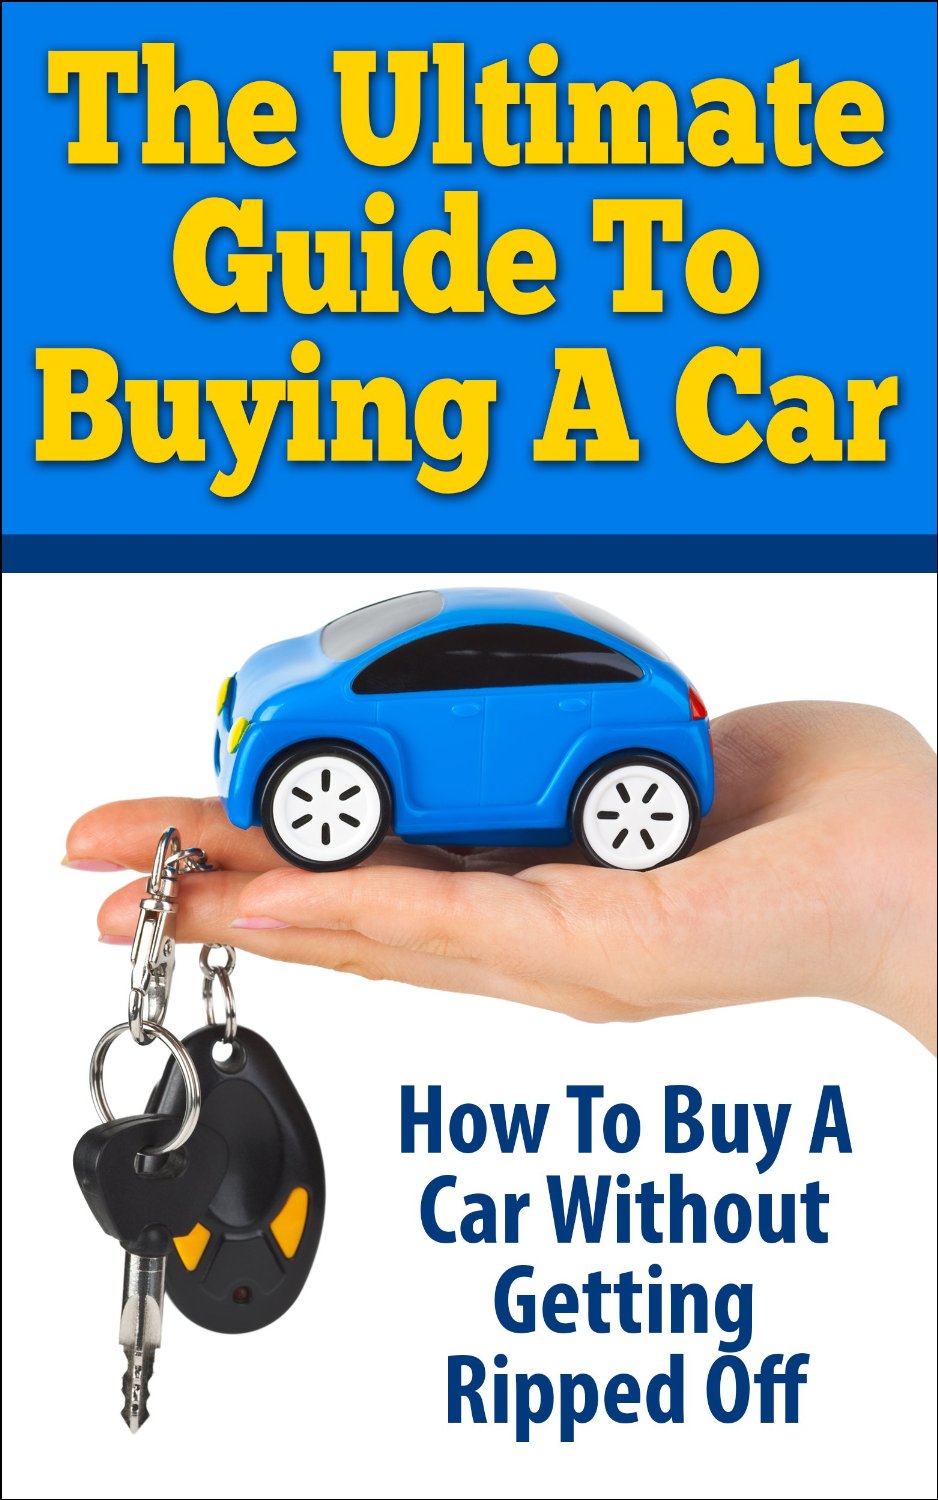 The Ultimate Guide To Buying A Car: How To Buy A Car Without Getting Ripped Off by George K.